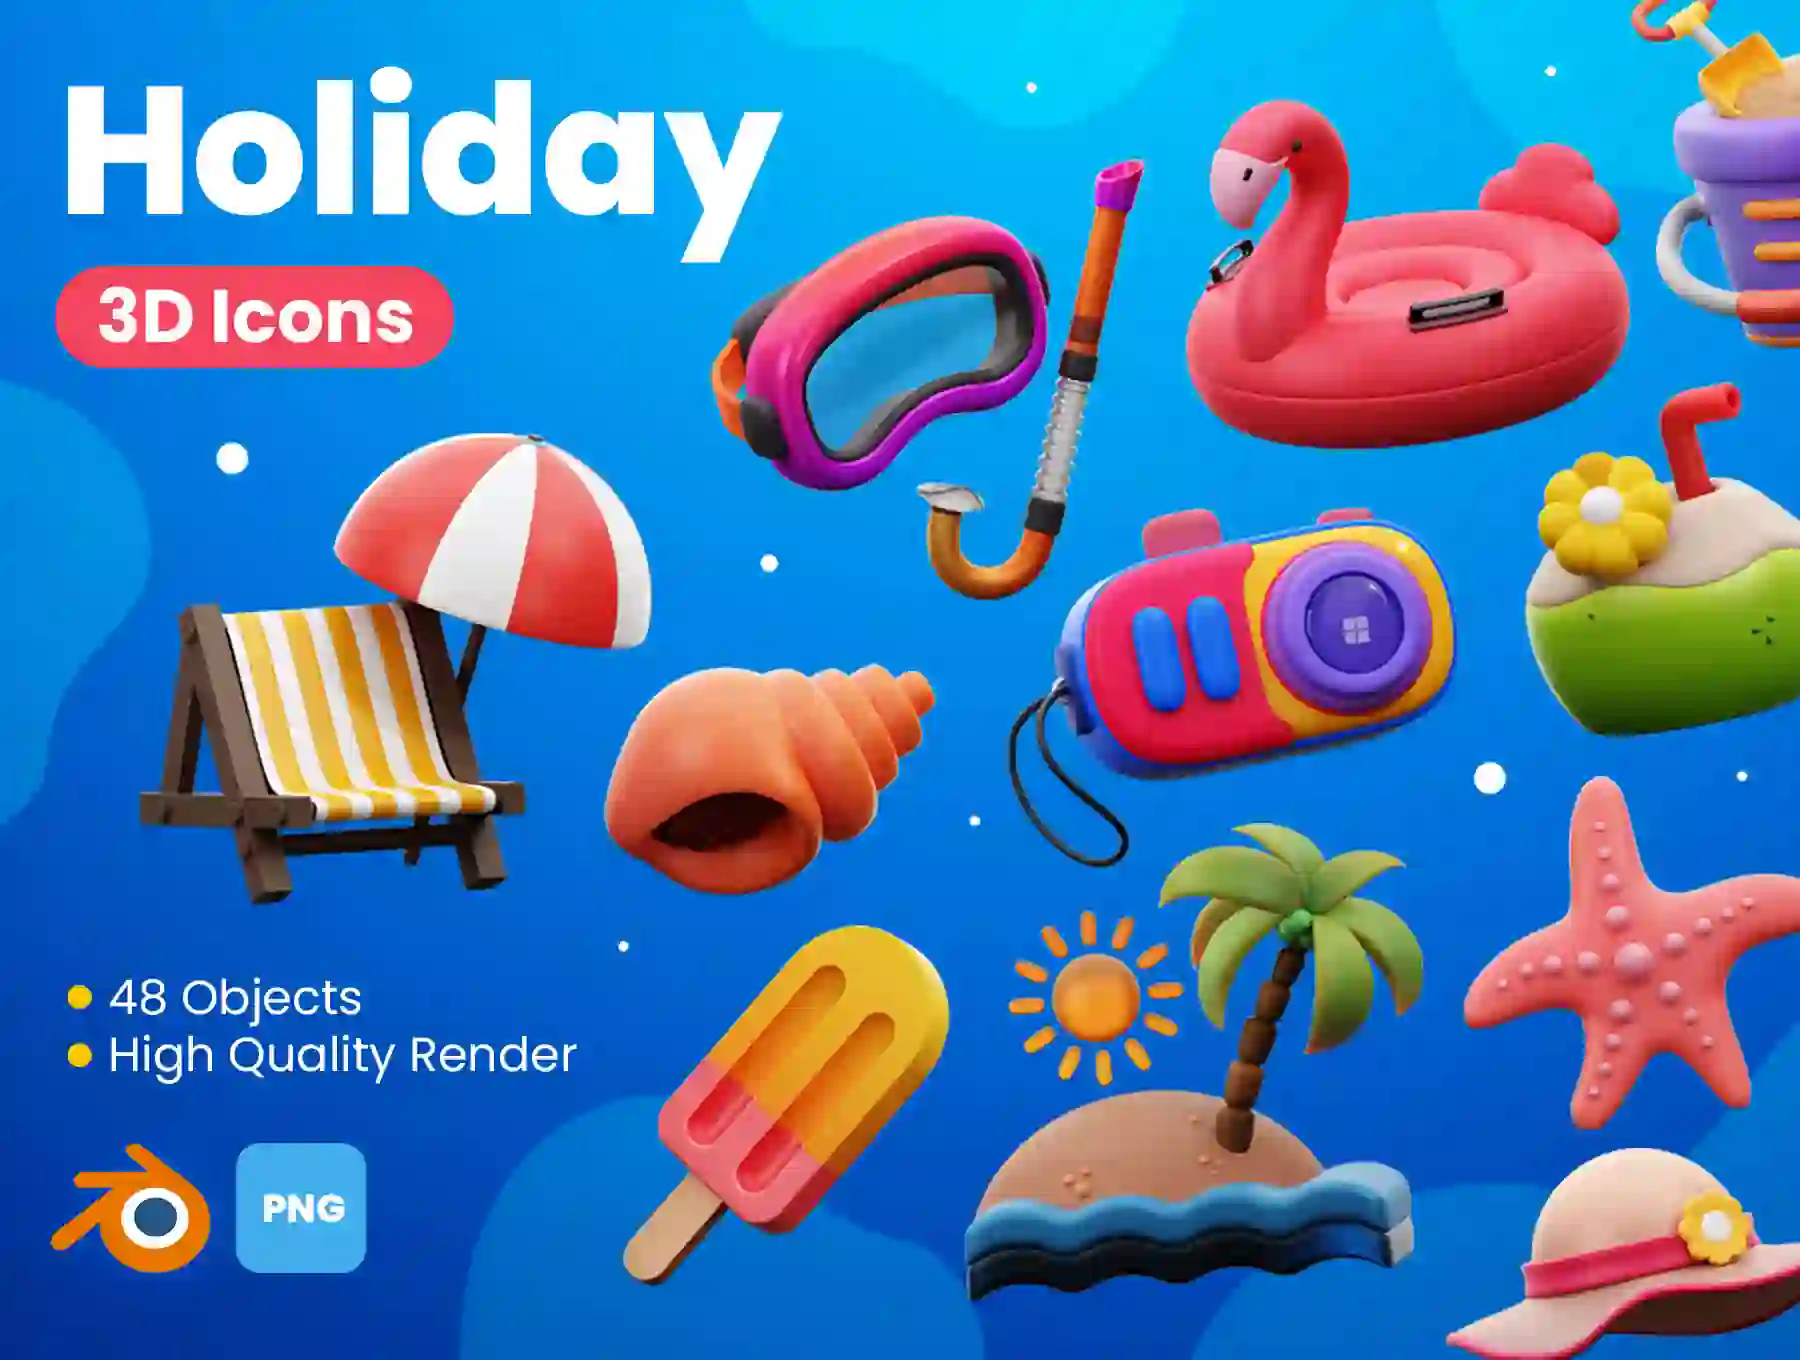 Holiday 3D Icons